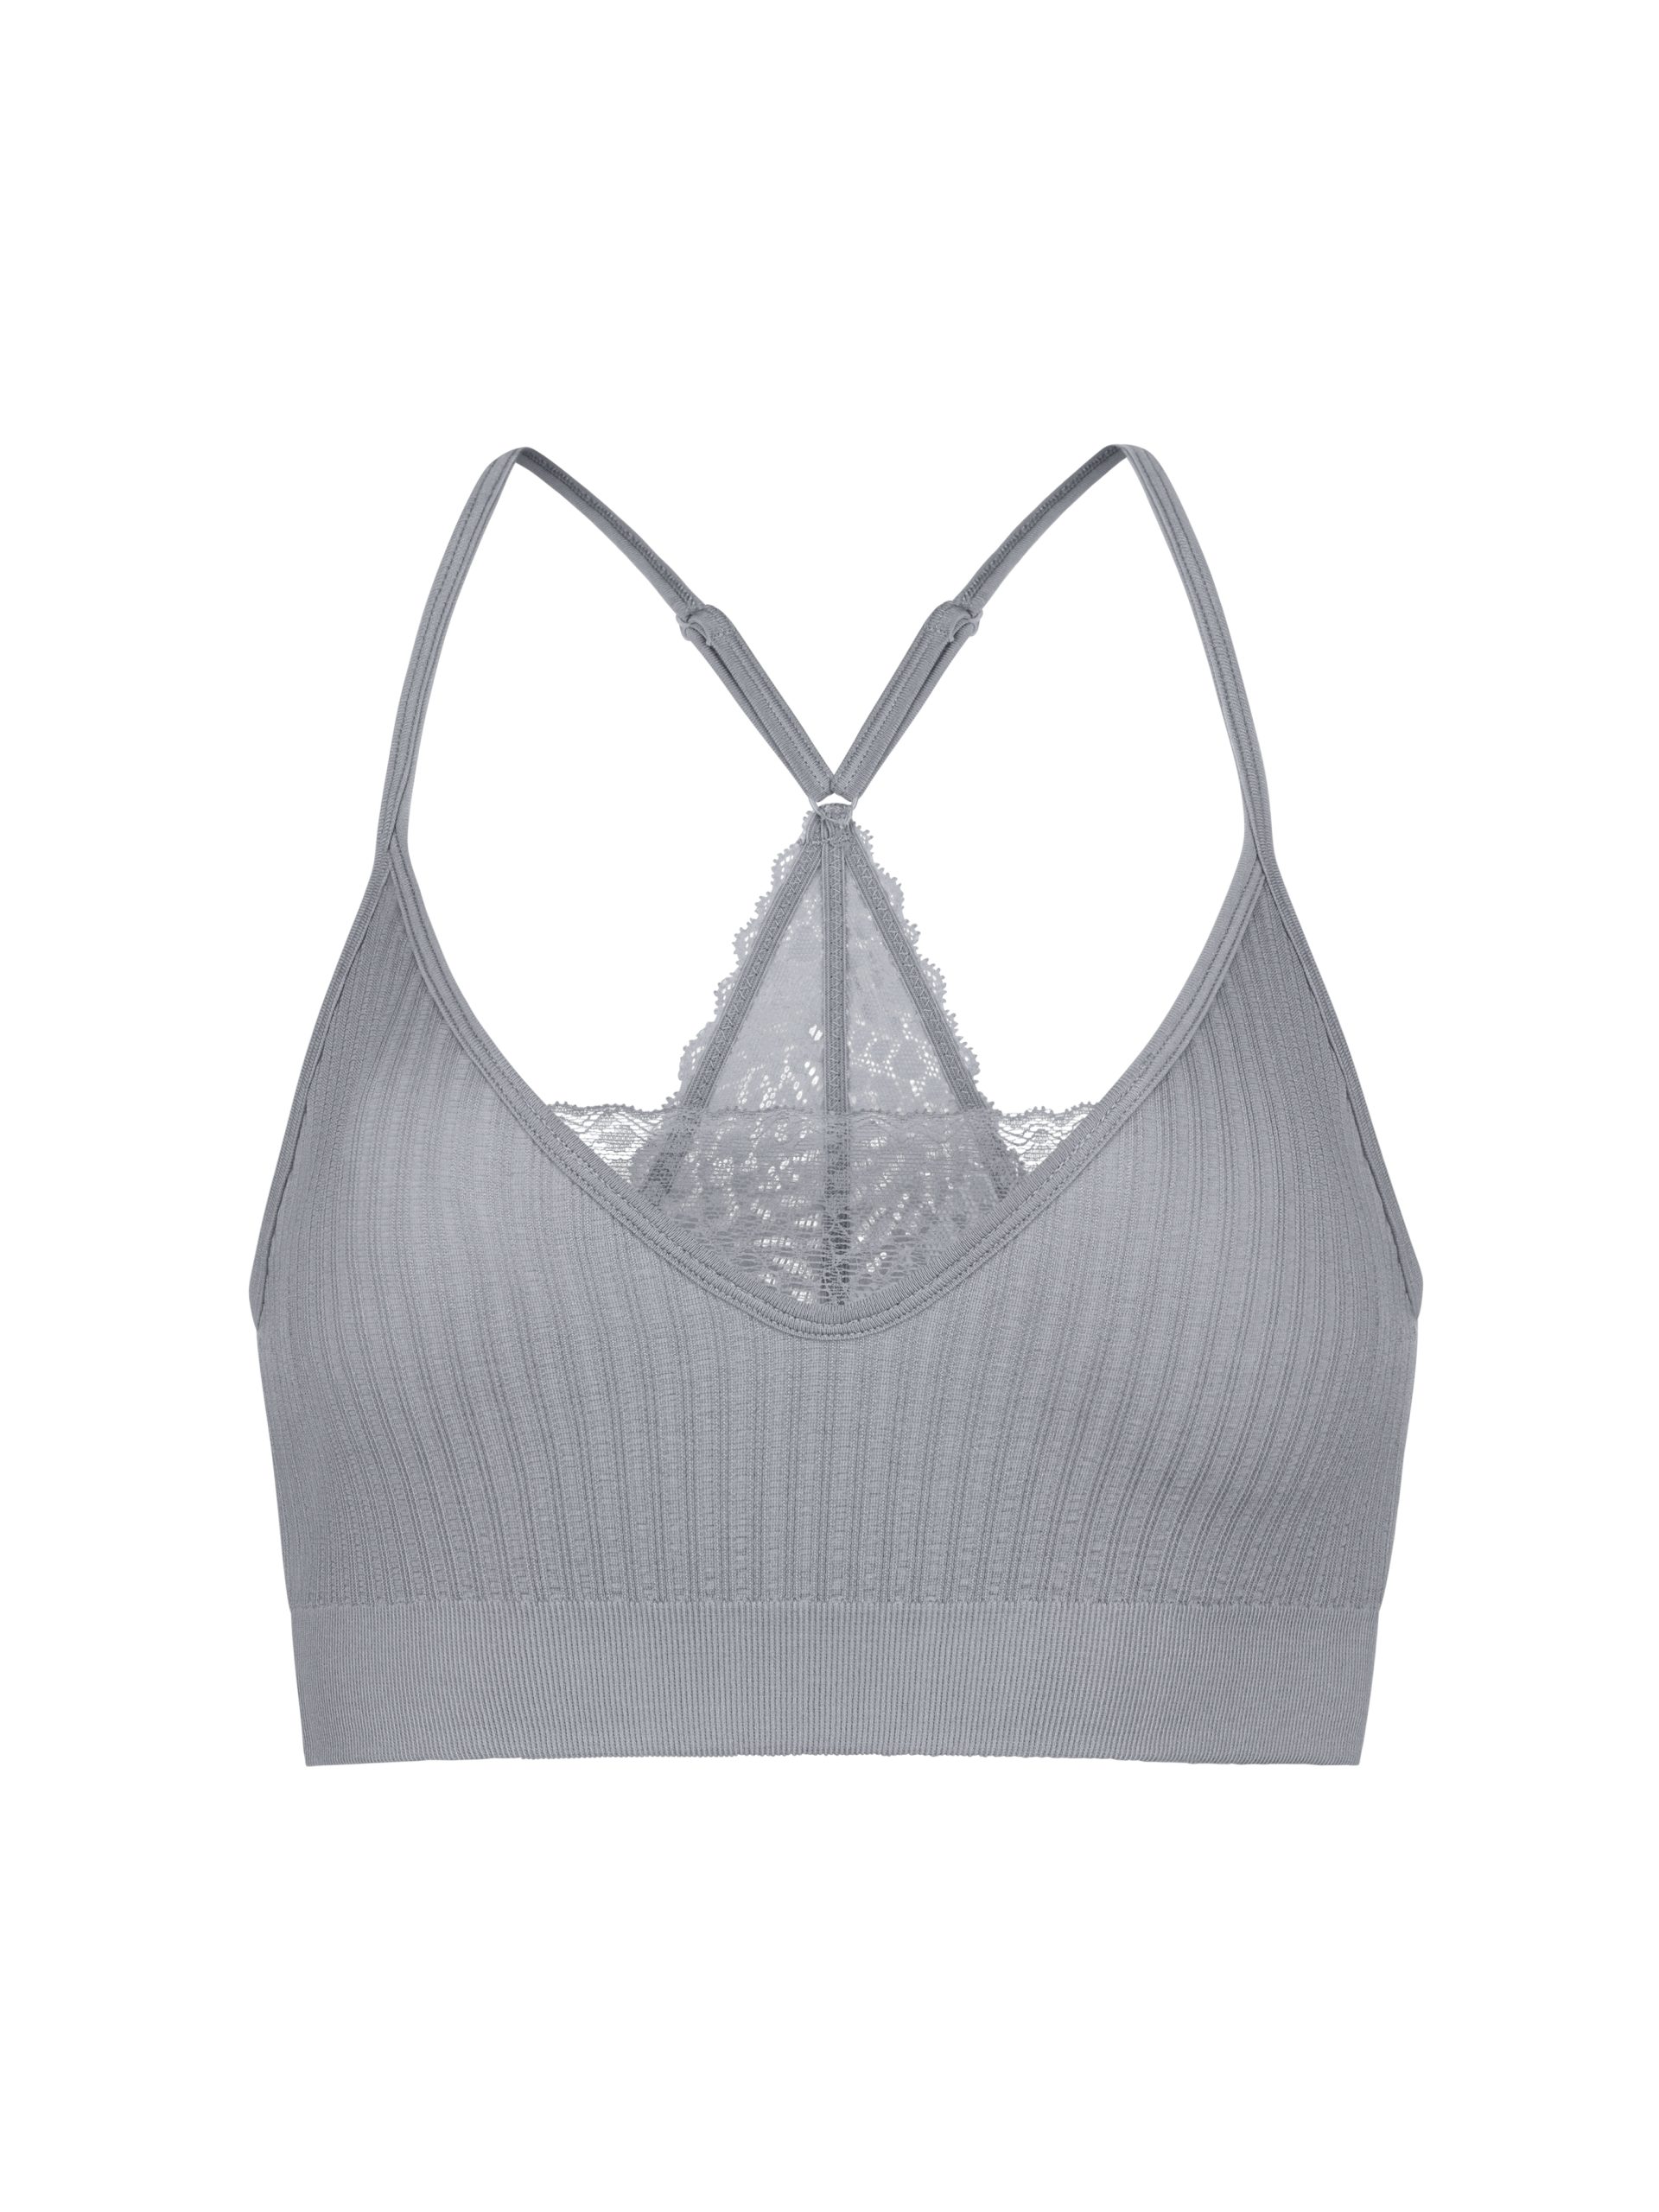 Stretch lace Bralette w/ removeable pads - Ash Grey – shopwithkarolyn